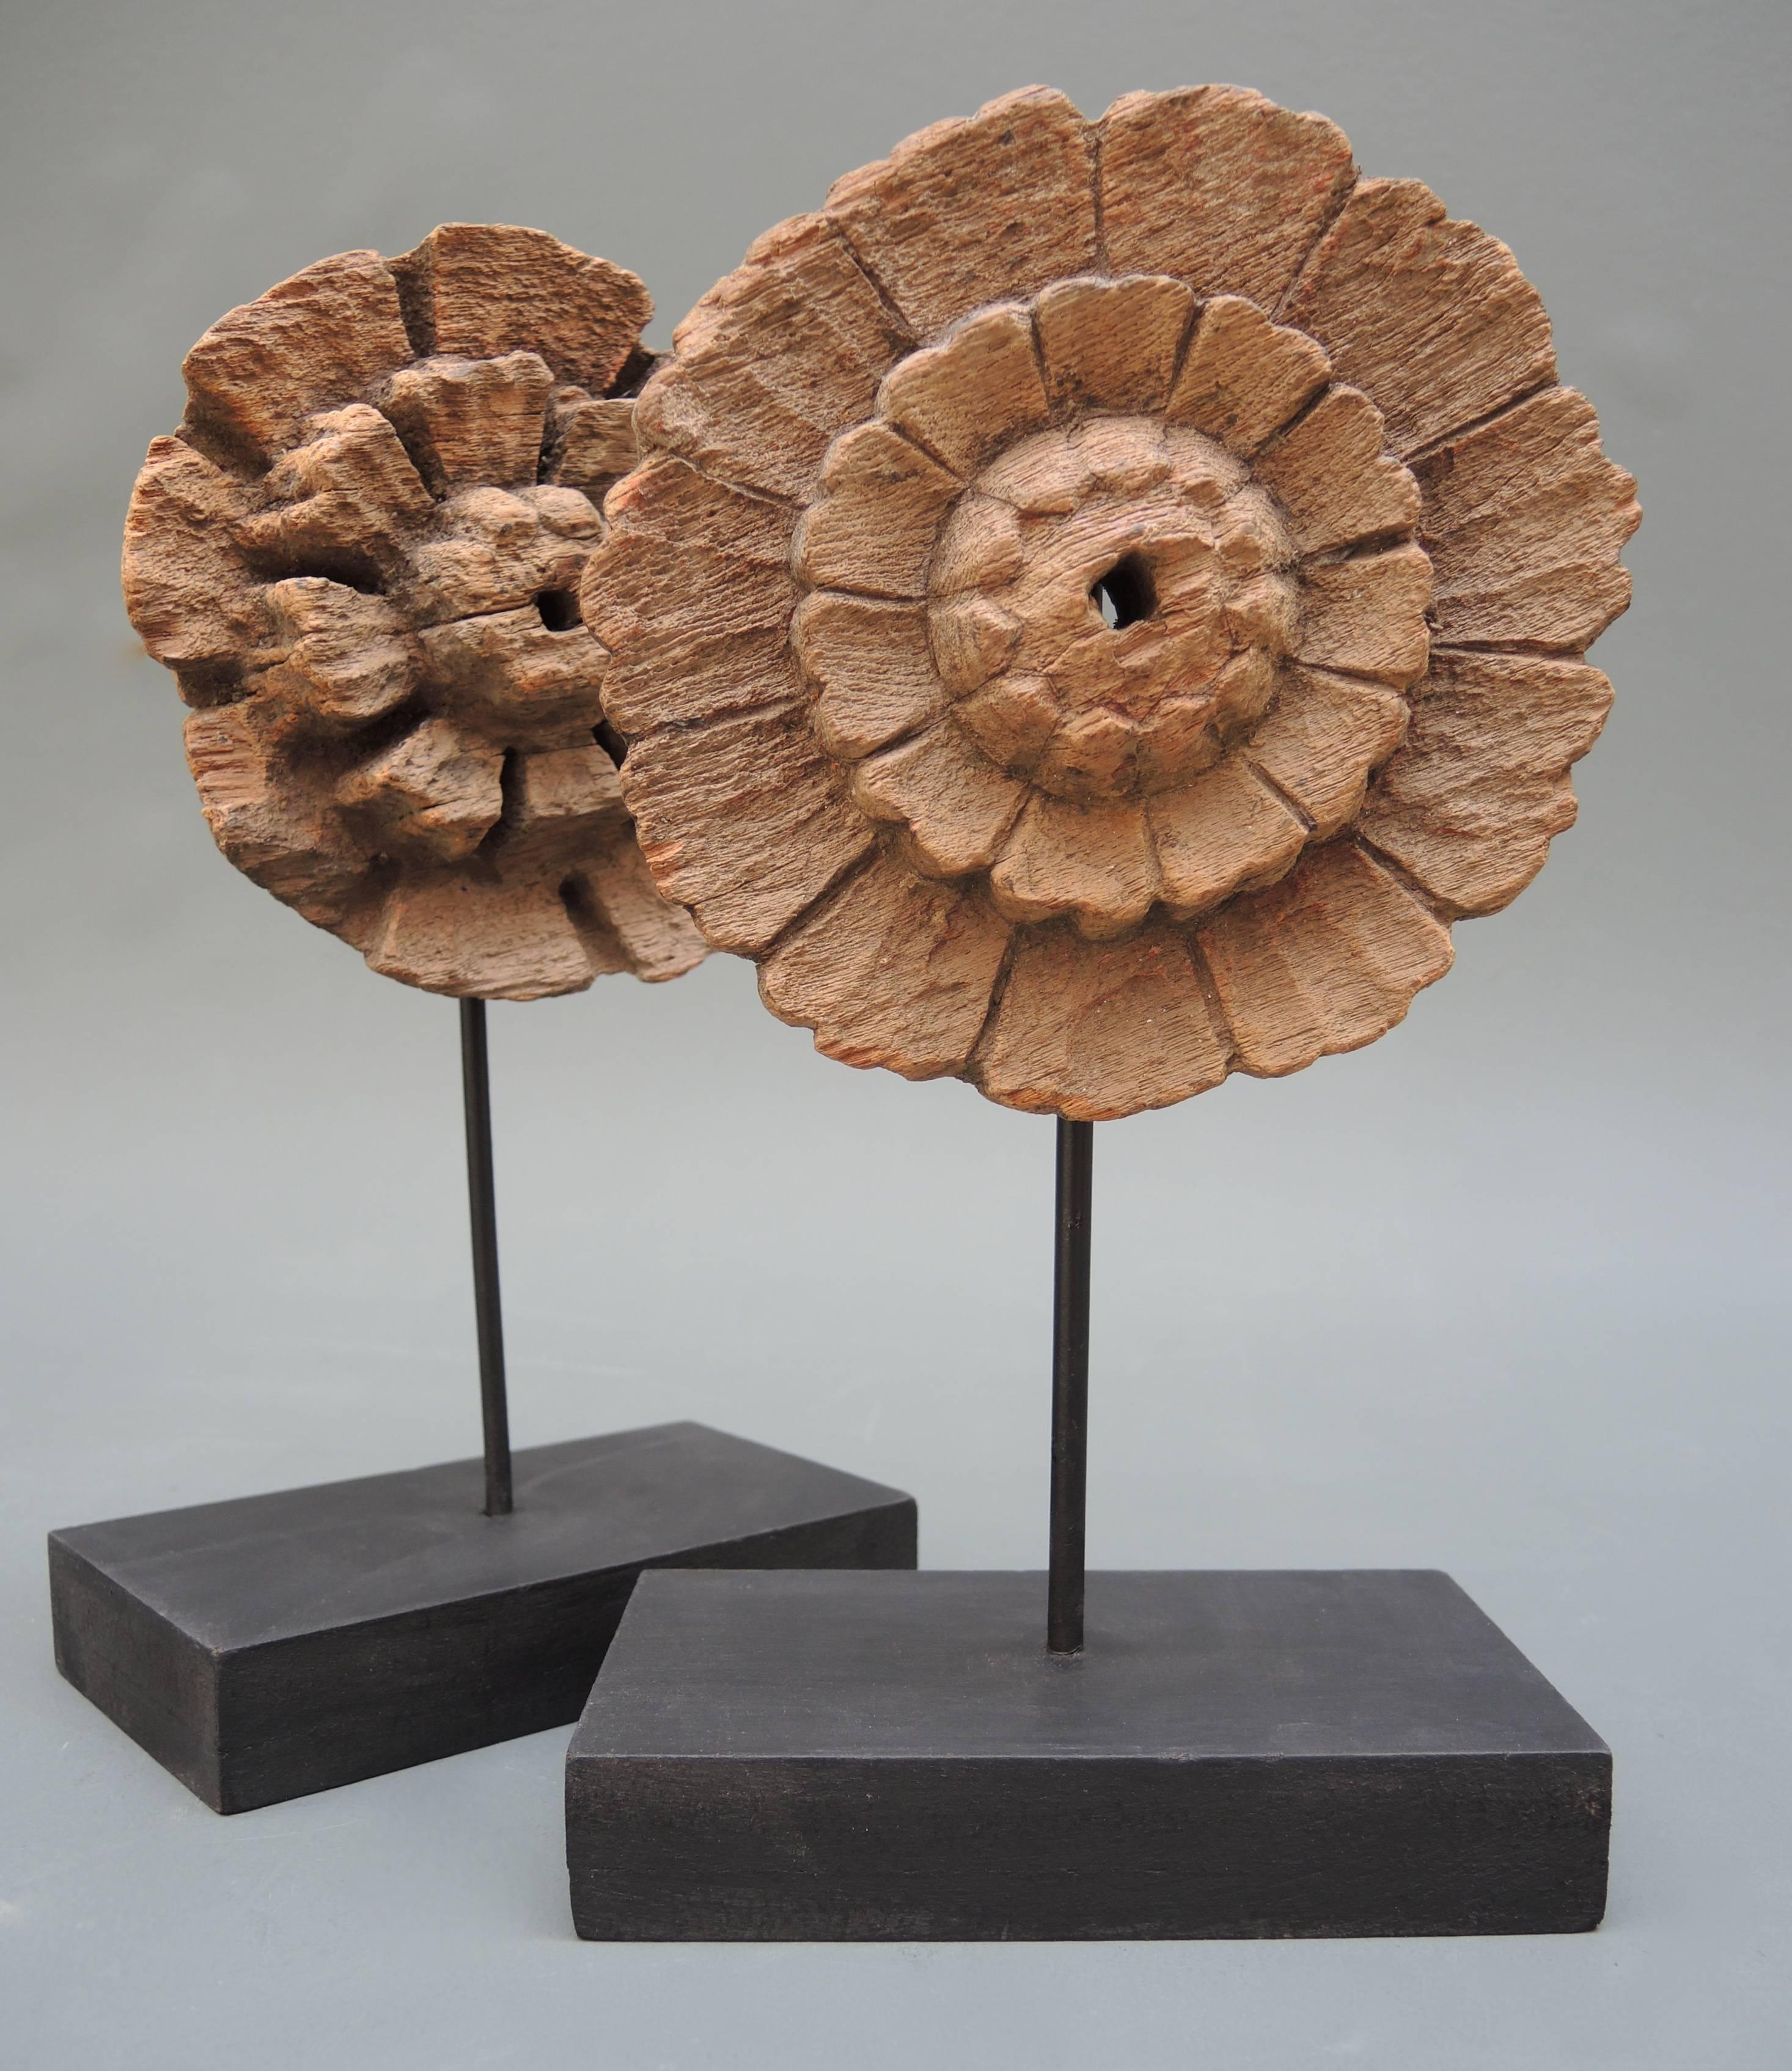 These two sunburst halos once adorned saint statues in Southern Italy.
The centre hole would fit onto a metal pin that protrudes from the top of the statues head. Mounted on stands.